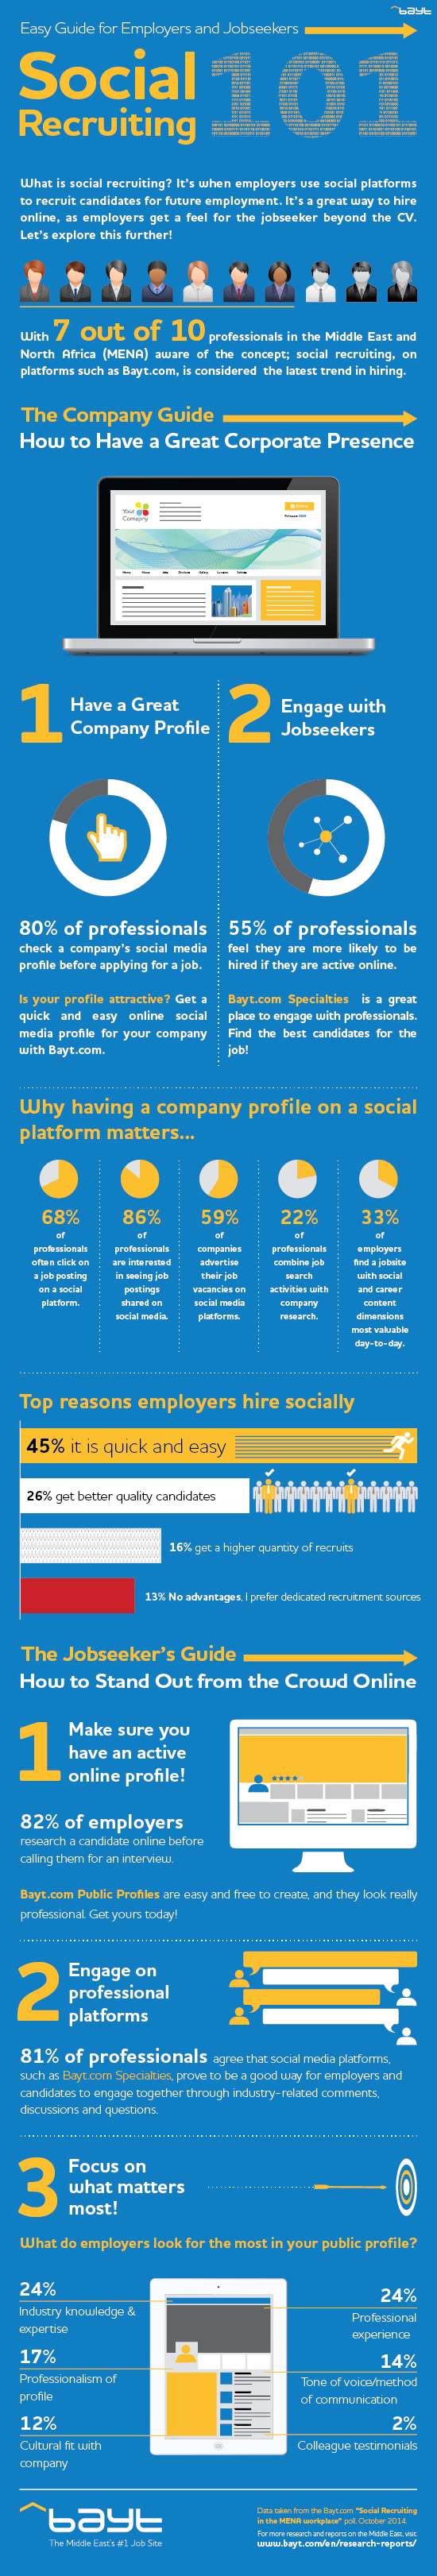 infographic social recruiting